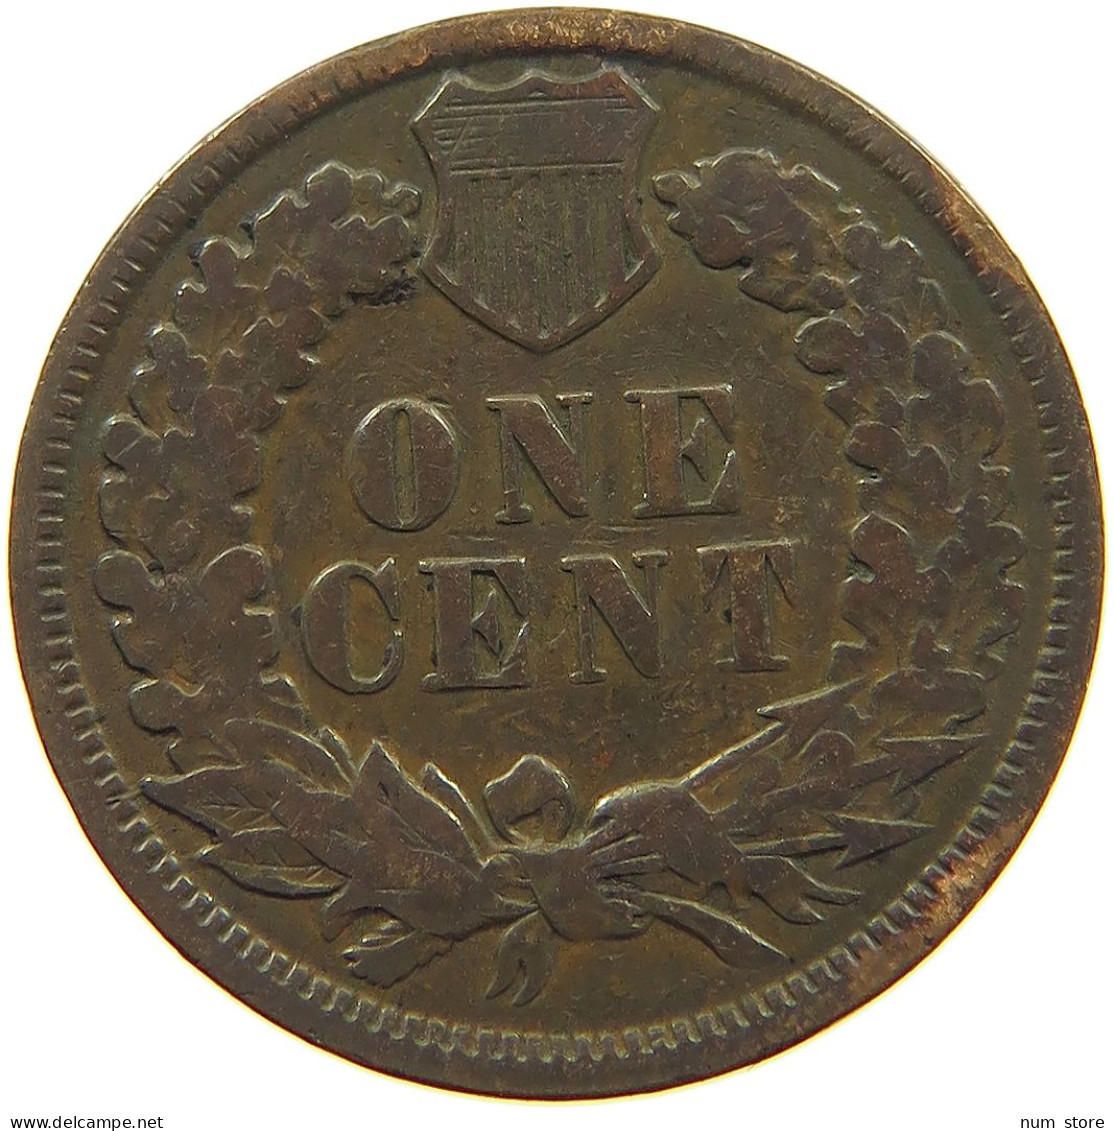 UNITED STATES OF AMERICA CENT 1887 INDIAN HEAD #c007 0177 - 1859-1909: Indian Head